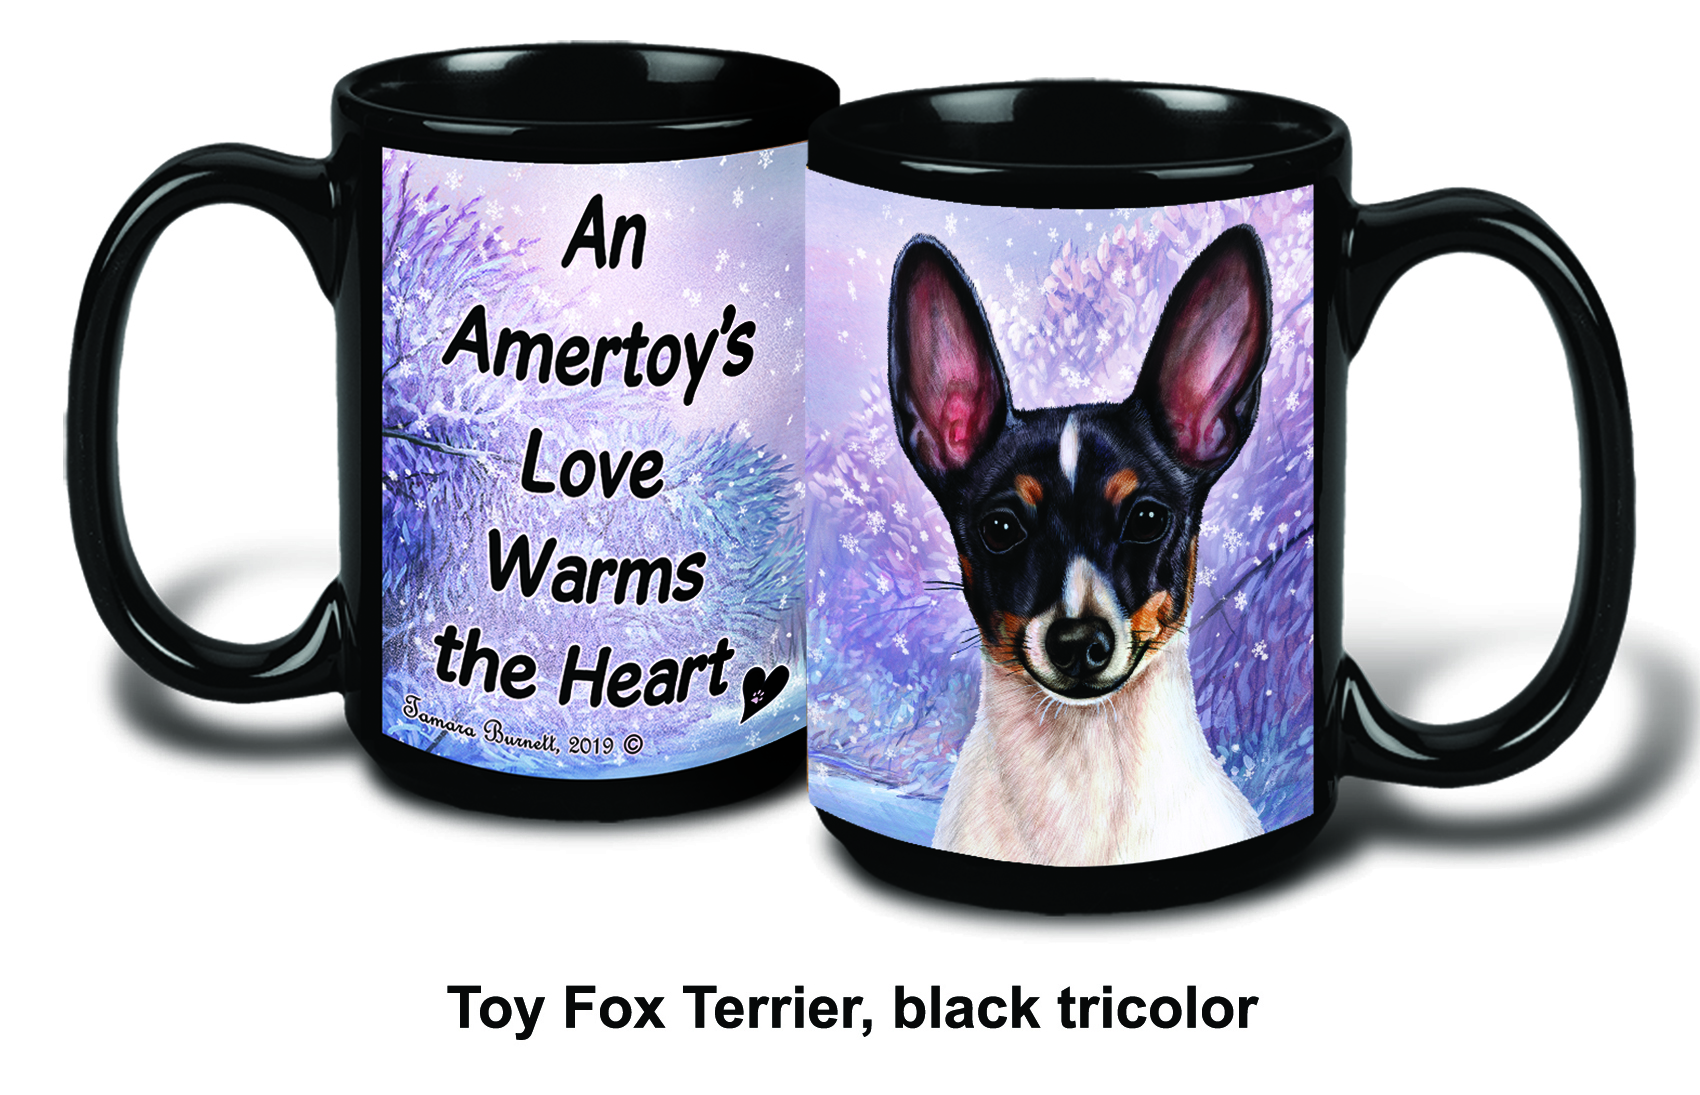 An image of the Toy Fox Terrier Black Tri Winter Mugs